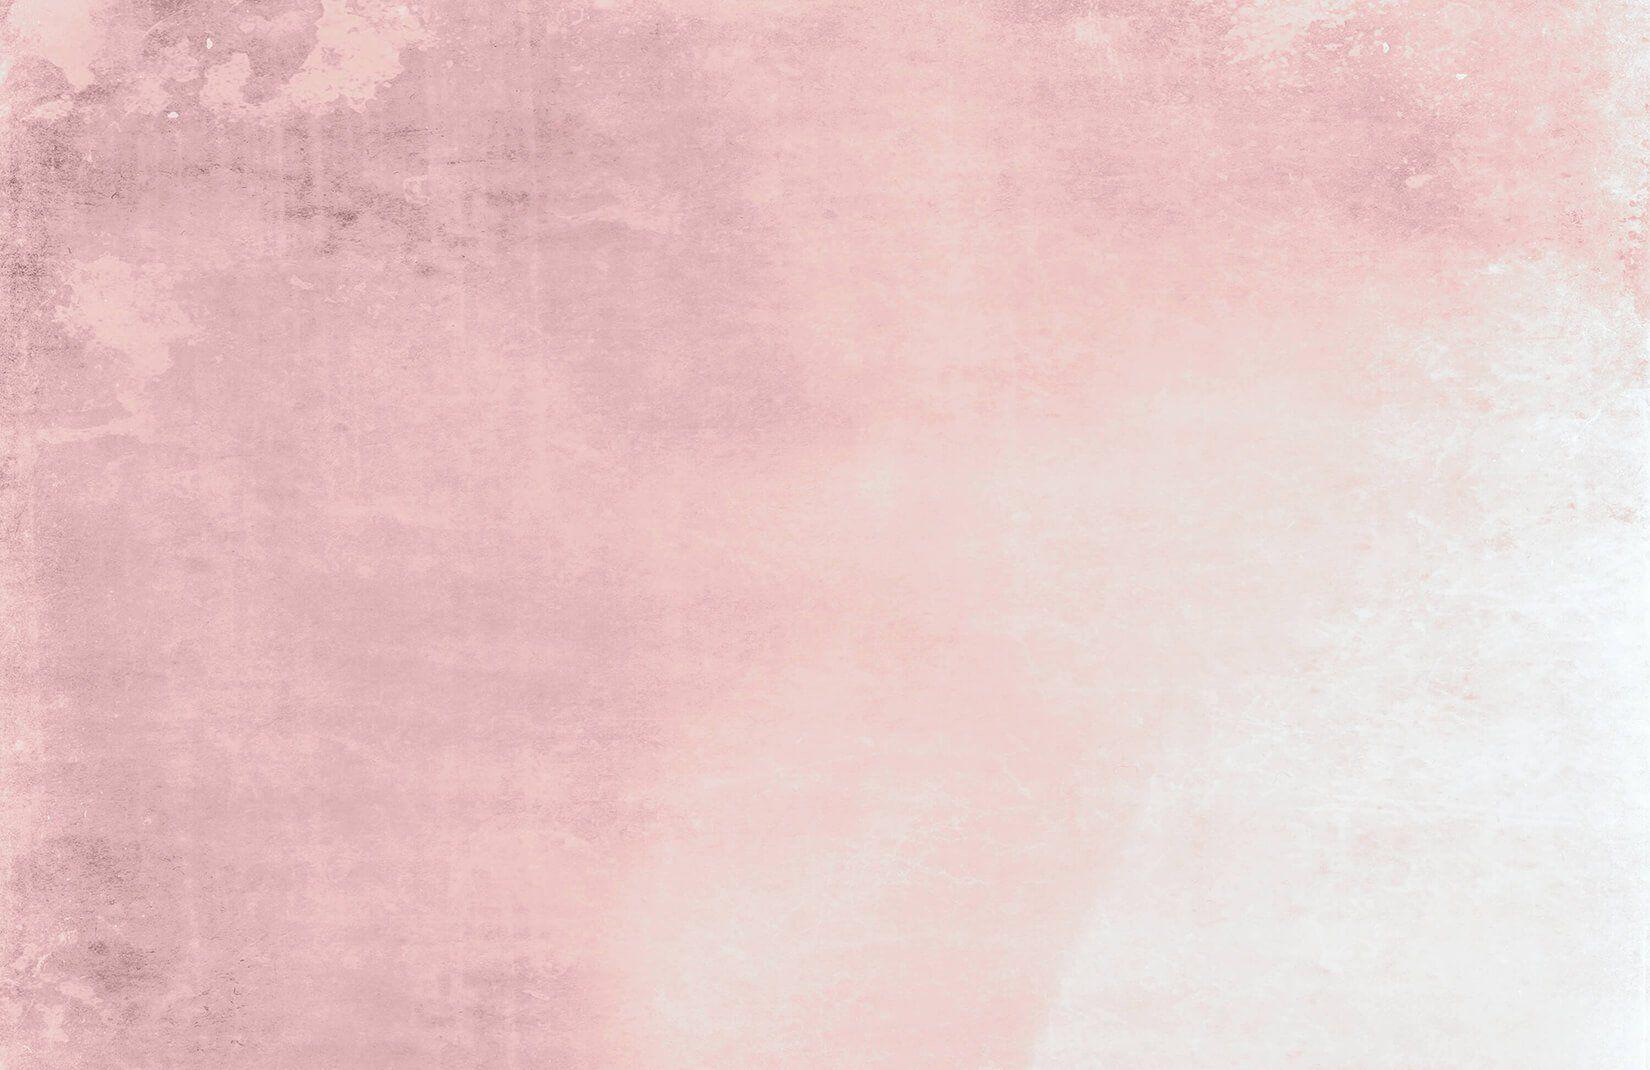 10 Perfect dusty pink desktop wallpaper You Can Use It At No Cost ...